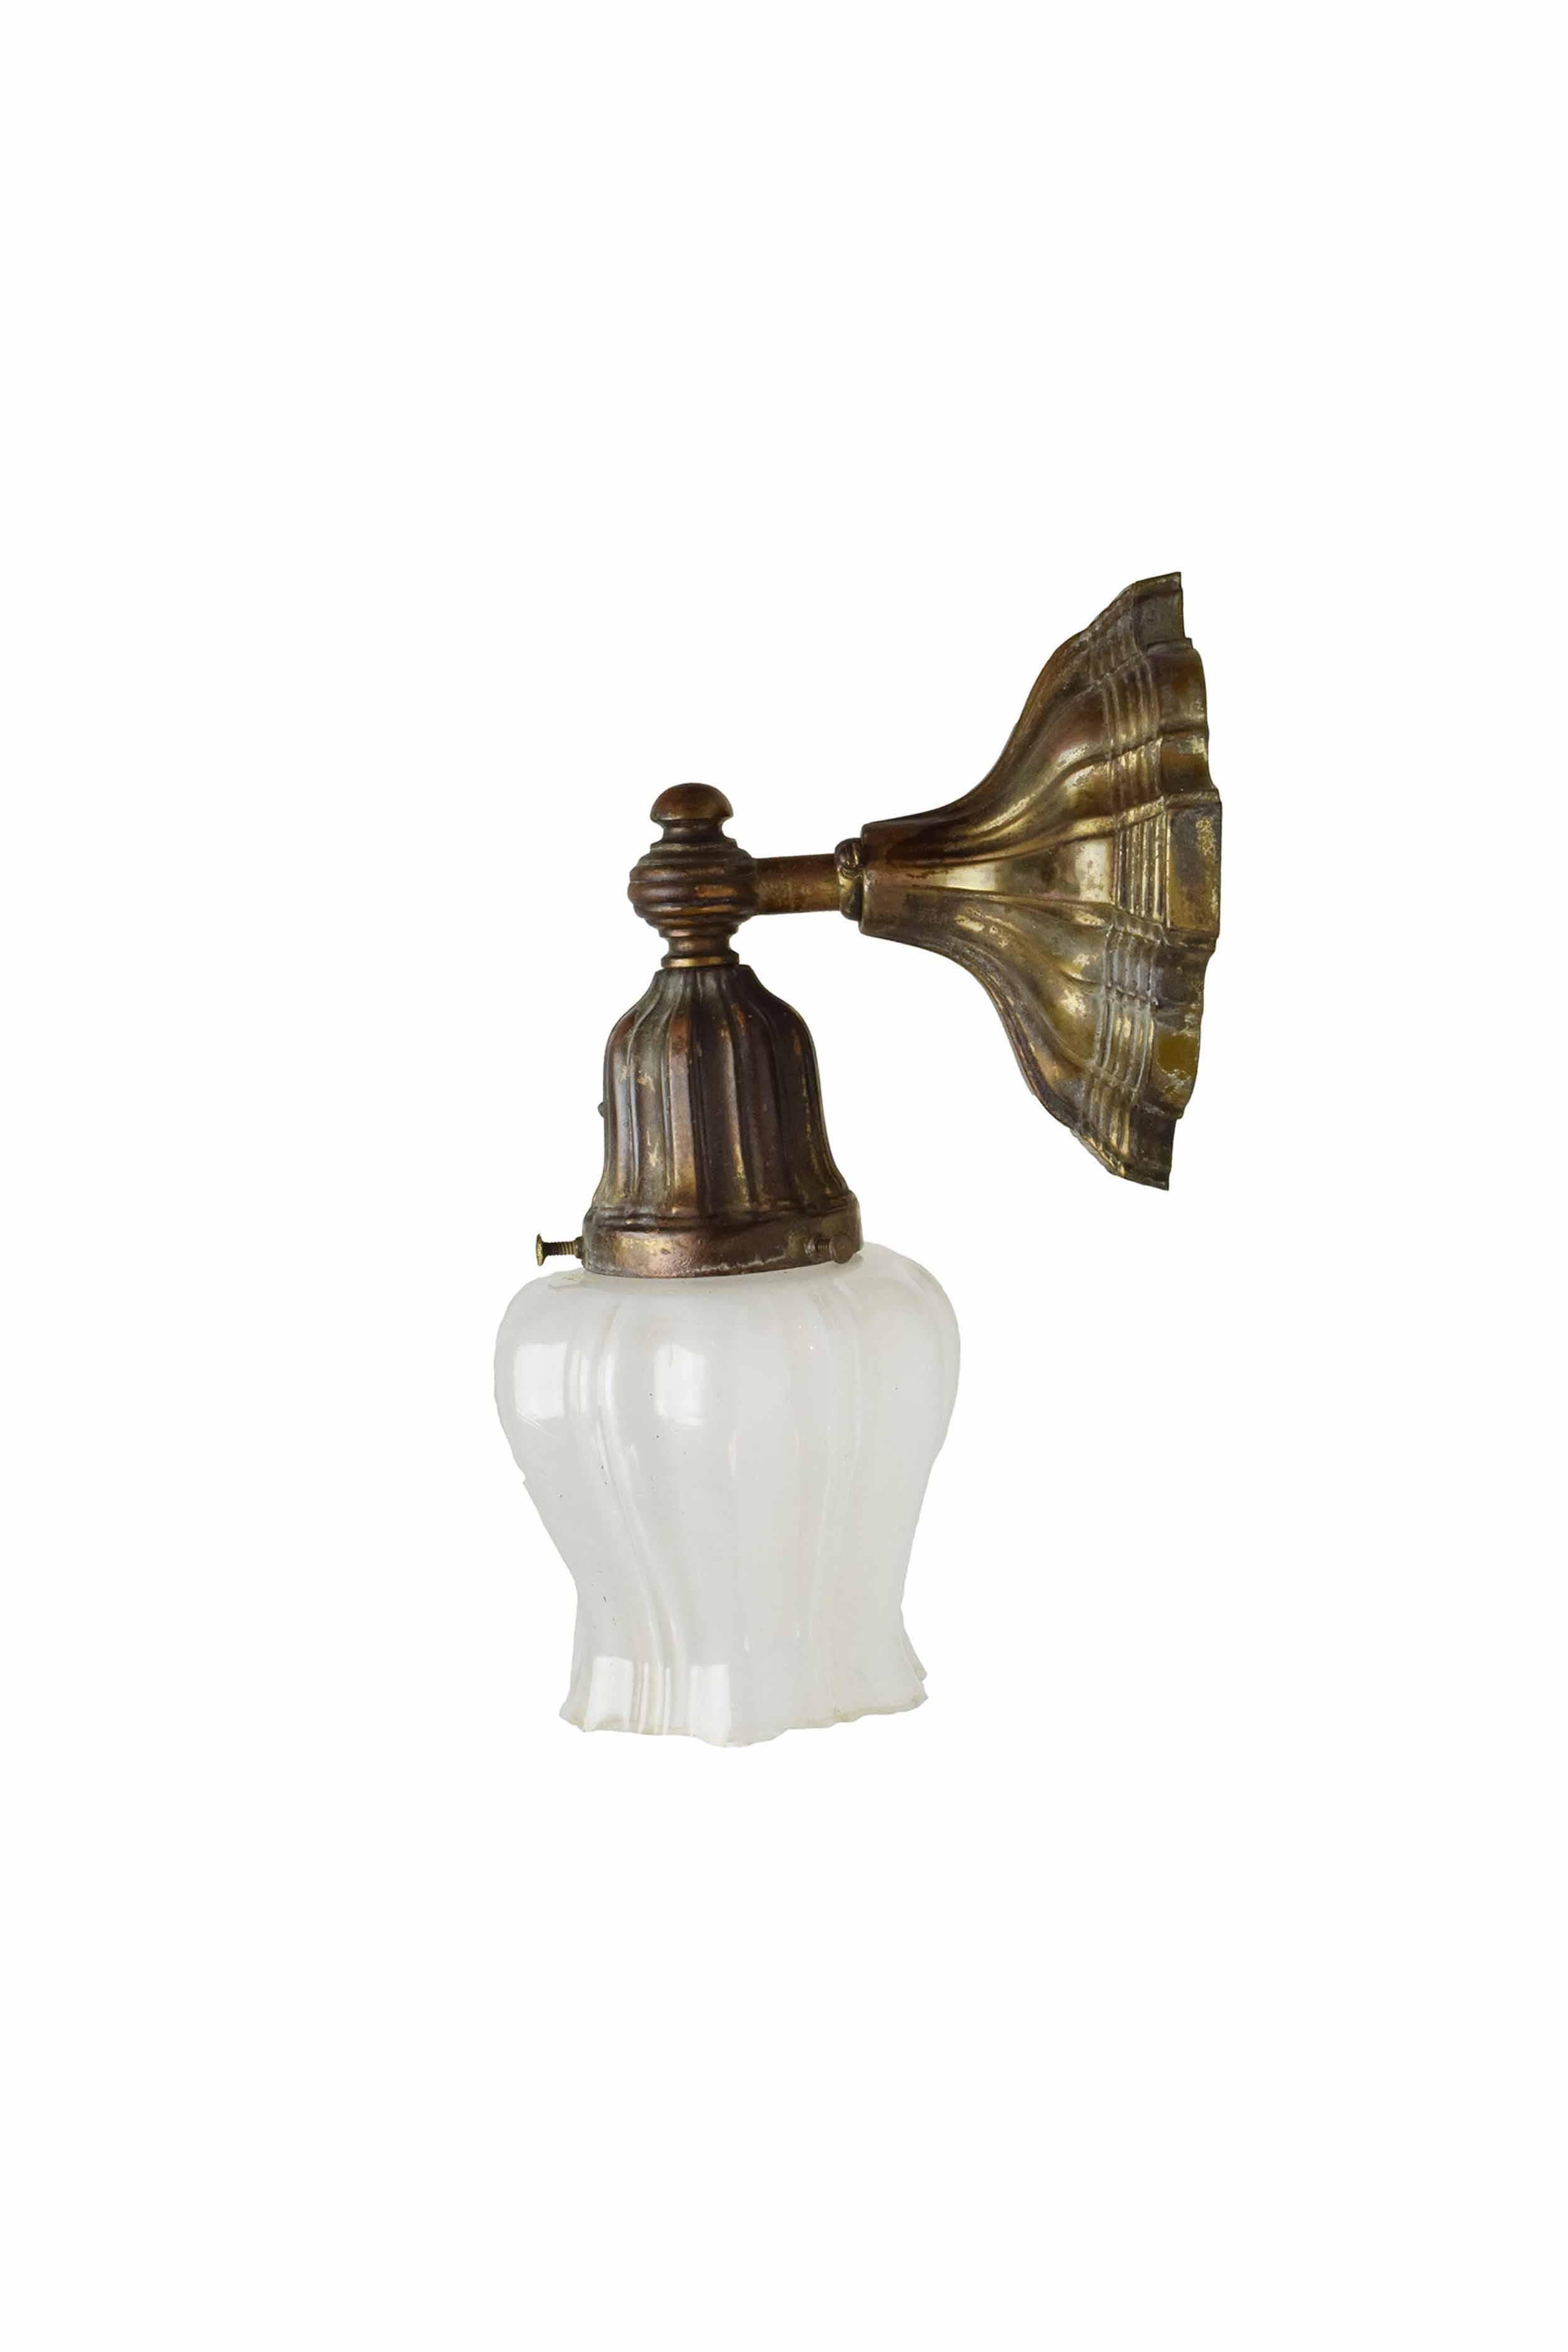 This brass Sheffield sconce will add a sense of wonder to your home! This sconce comes with the beautiful white glass shade pictured. 

Finish: Original
Country of origin: USA
Single intermediate socket

We find that early antique lighting was